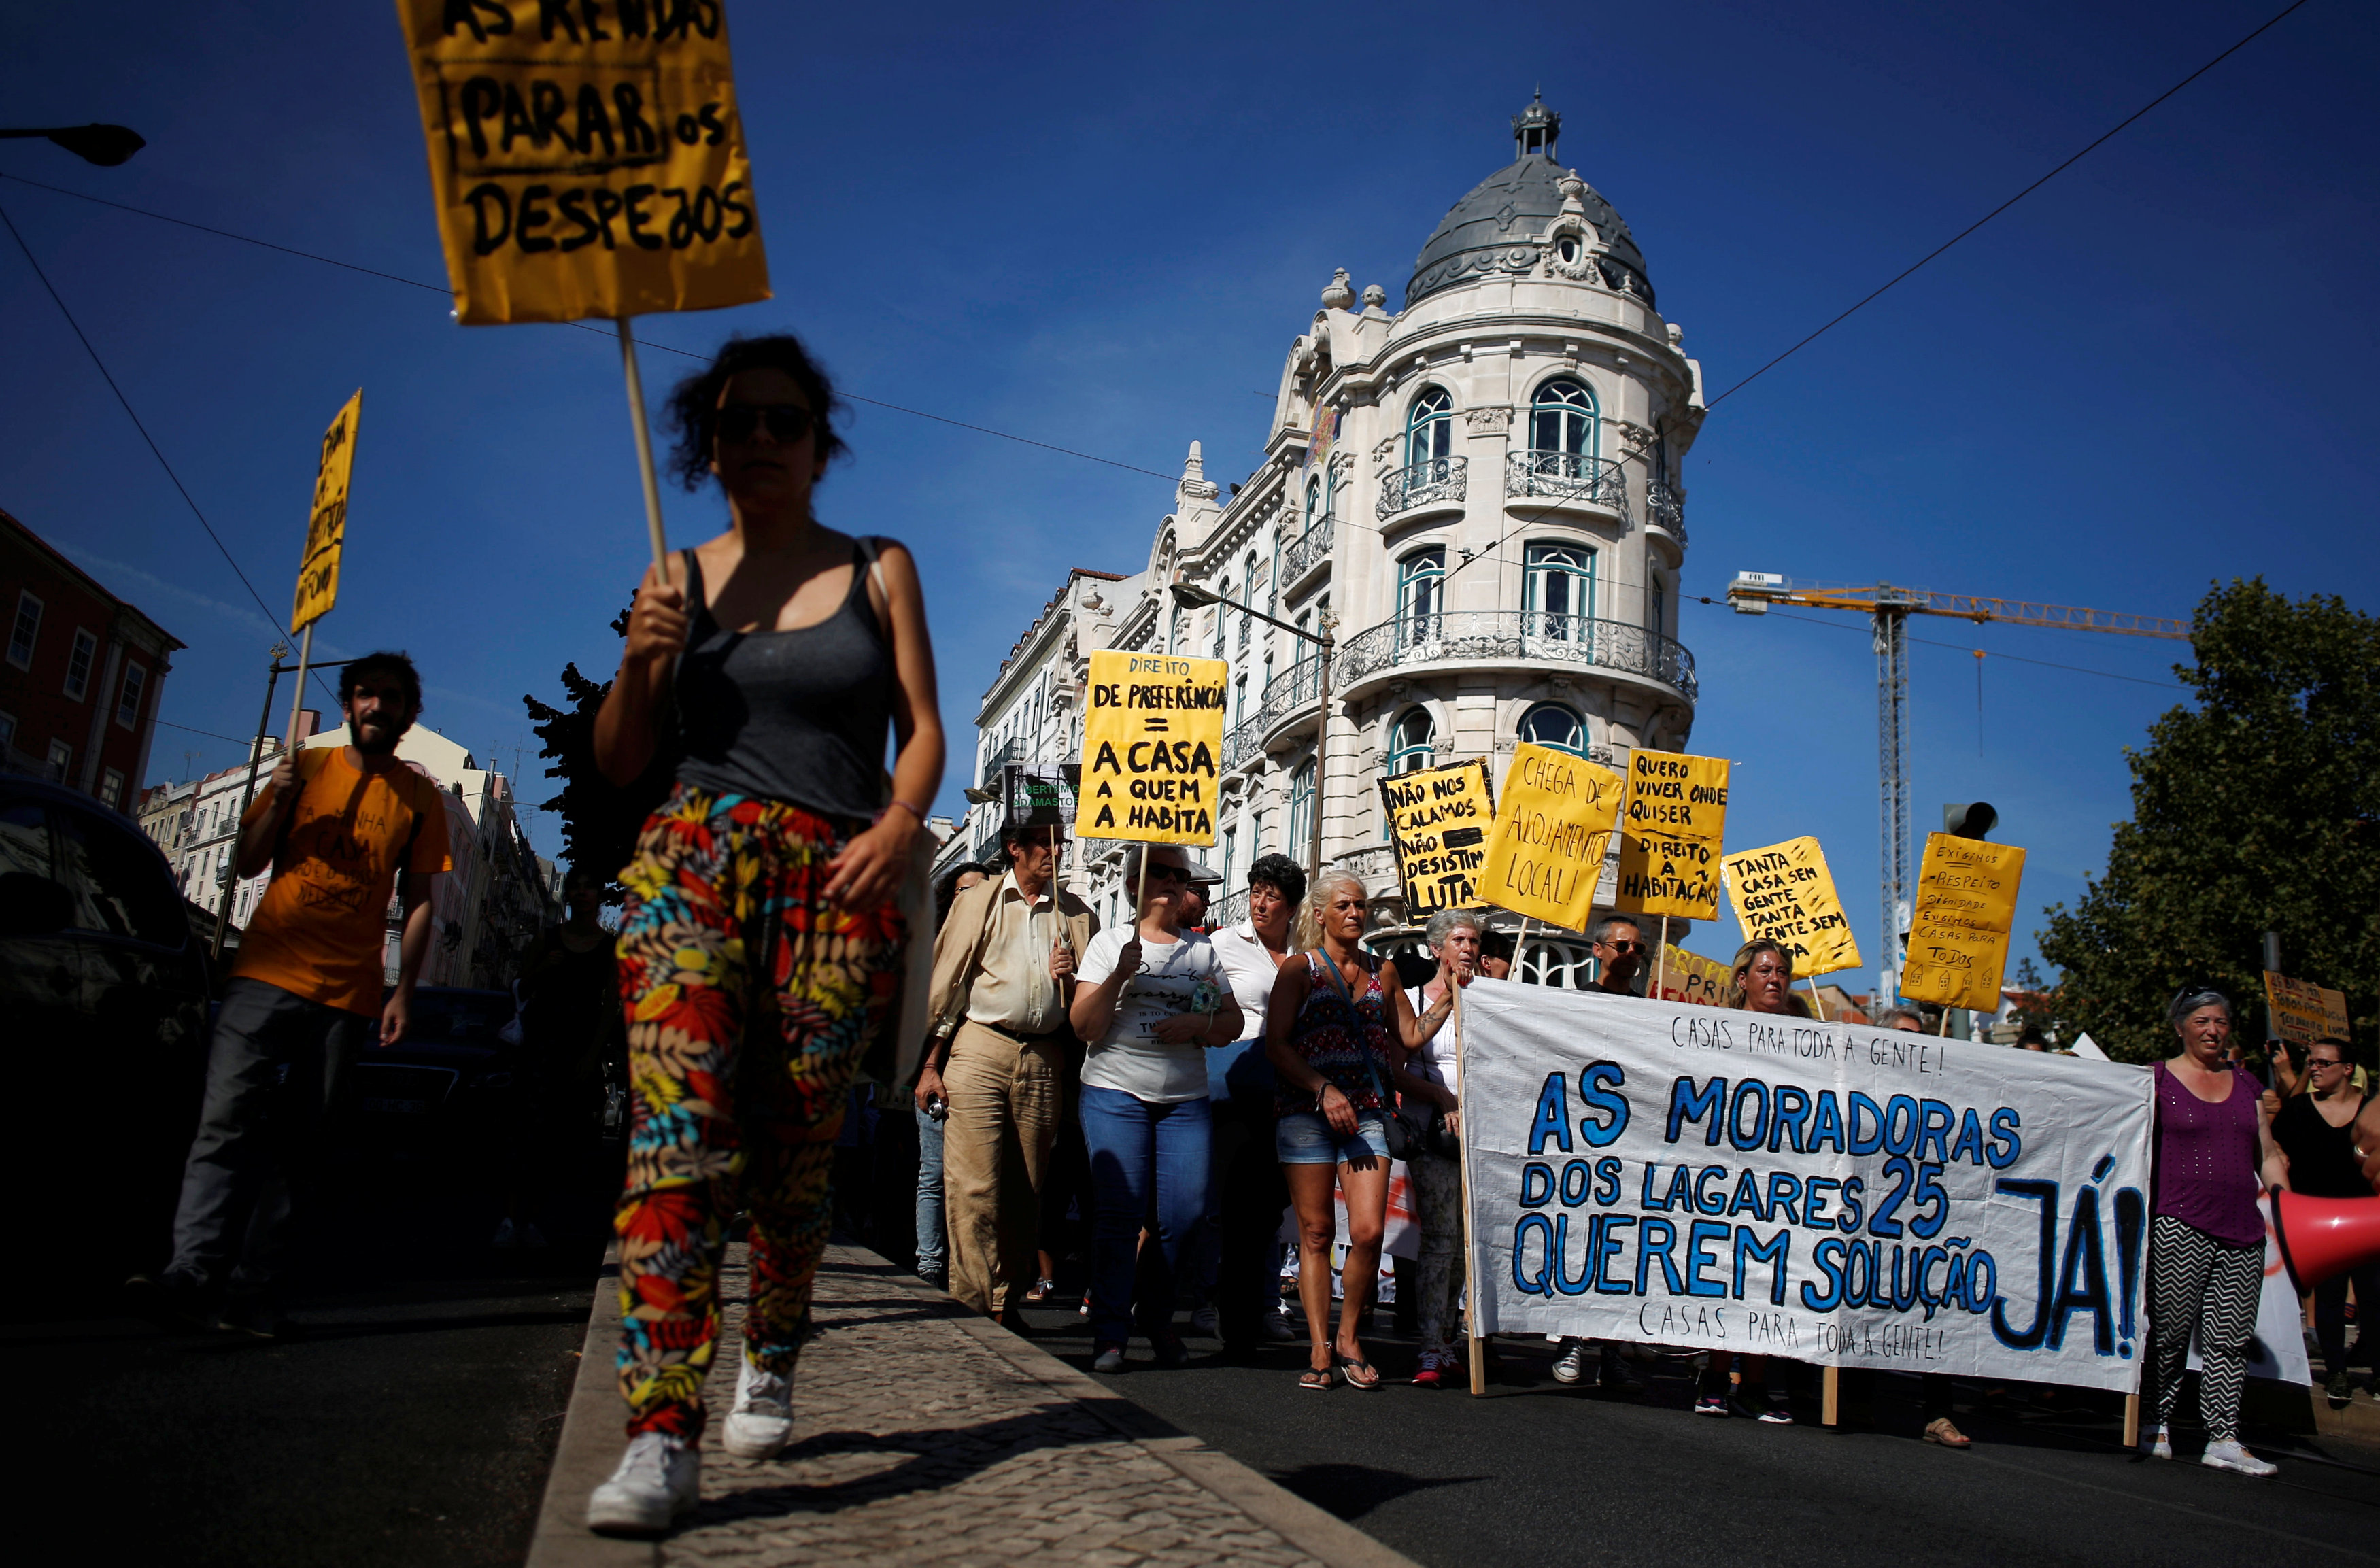 2018-09-22T164438Z_894530770_RC1B80BD5070_RTRMADP_3_PORTUGAL-PROTESTS-HOUSING